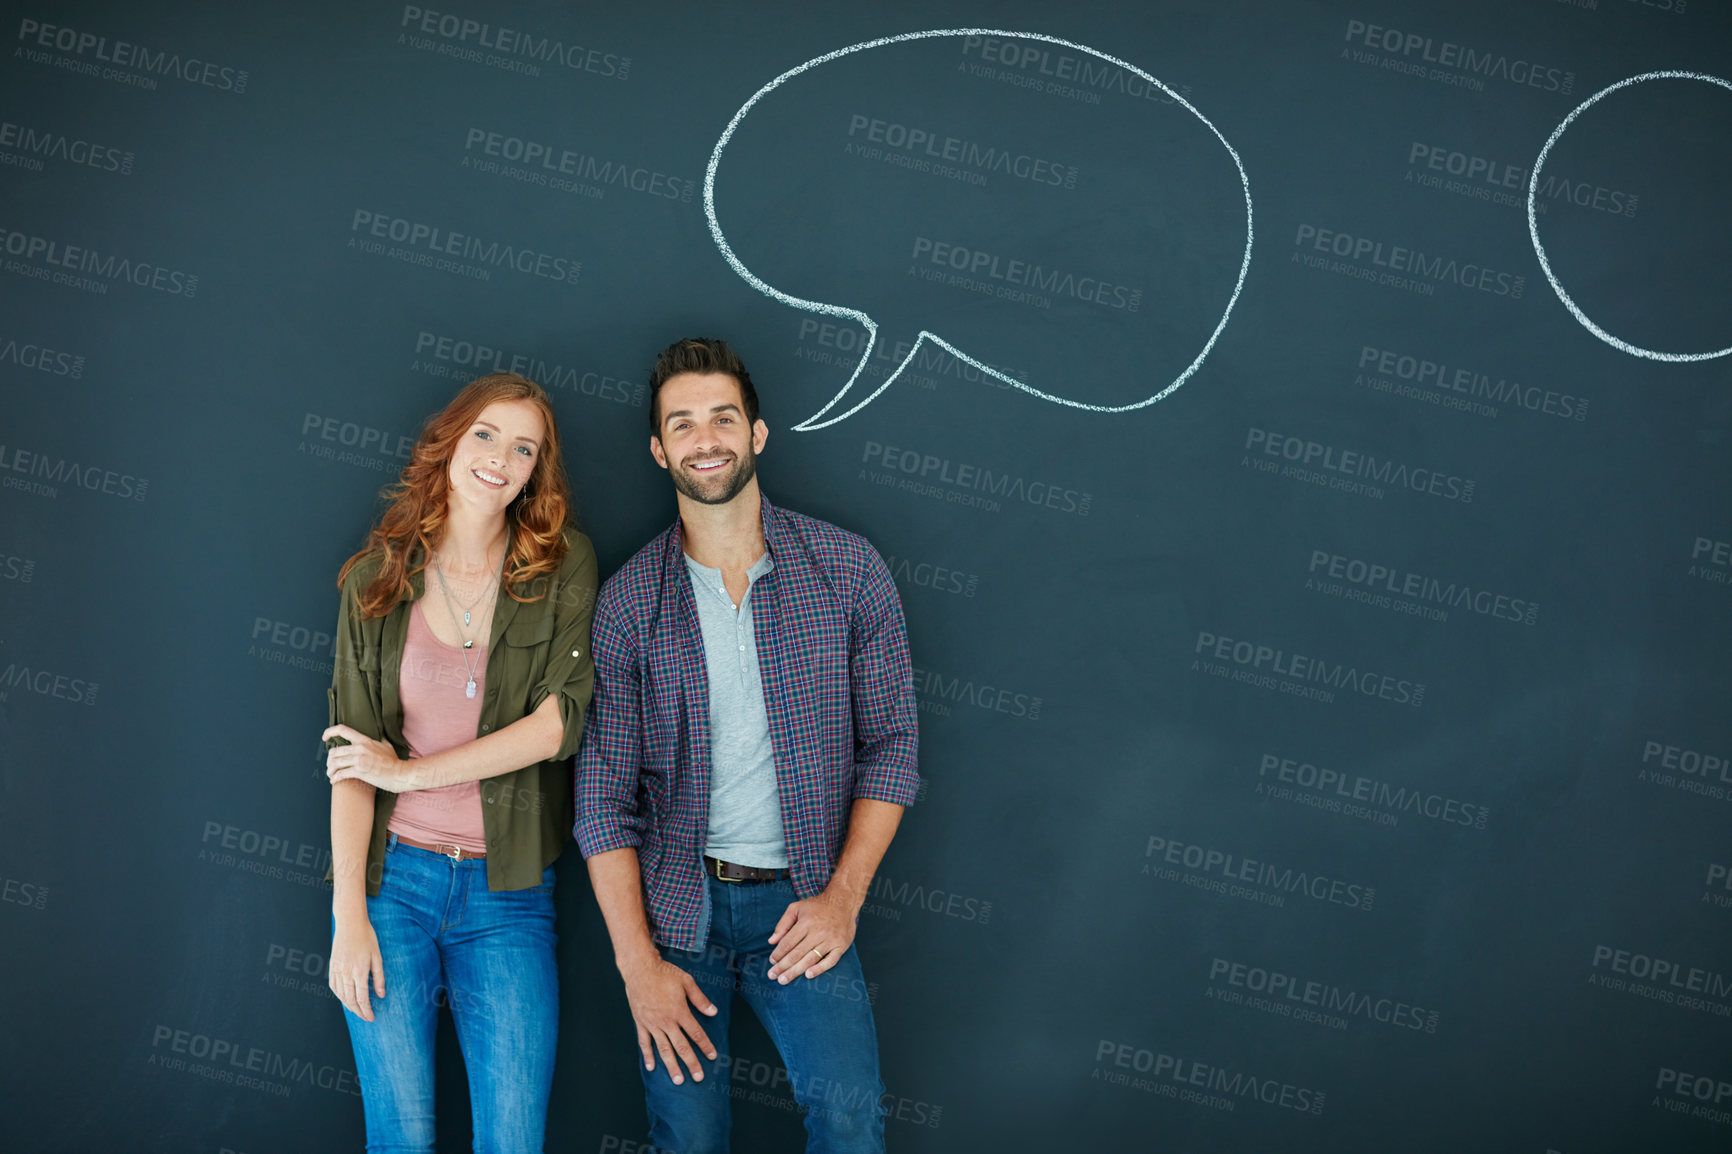 Buy stock photo Portrait of a young couple standing in front of a blackboard with speech bubbles drawn on it